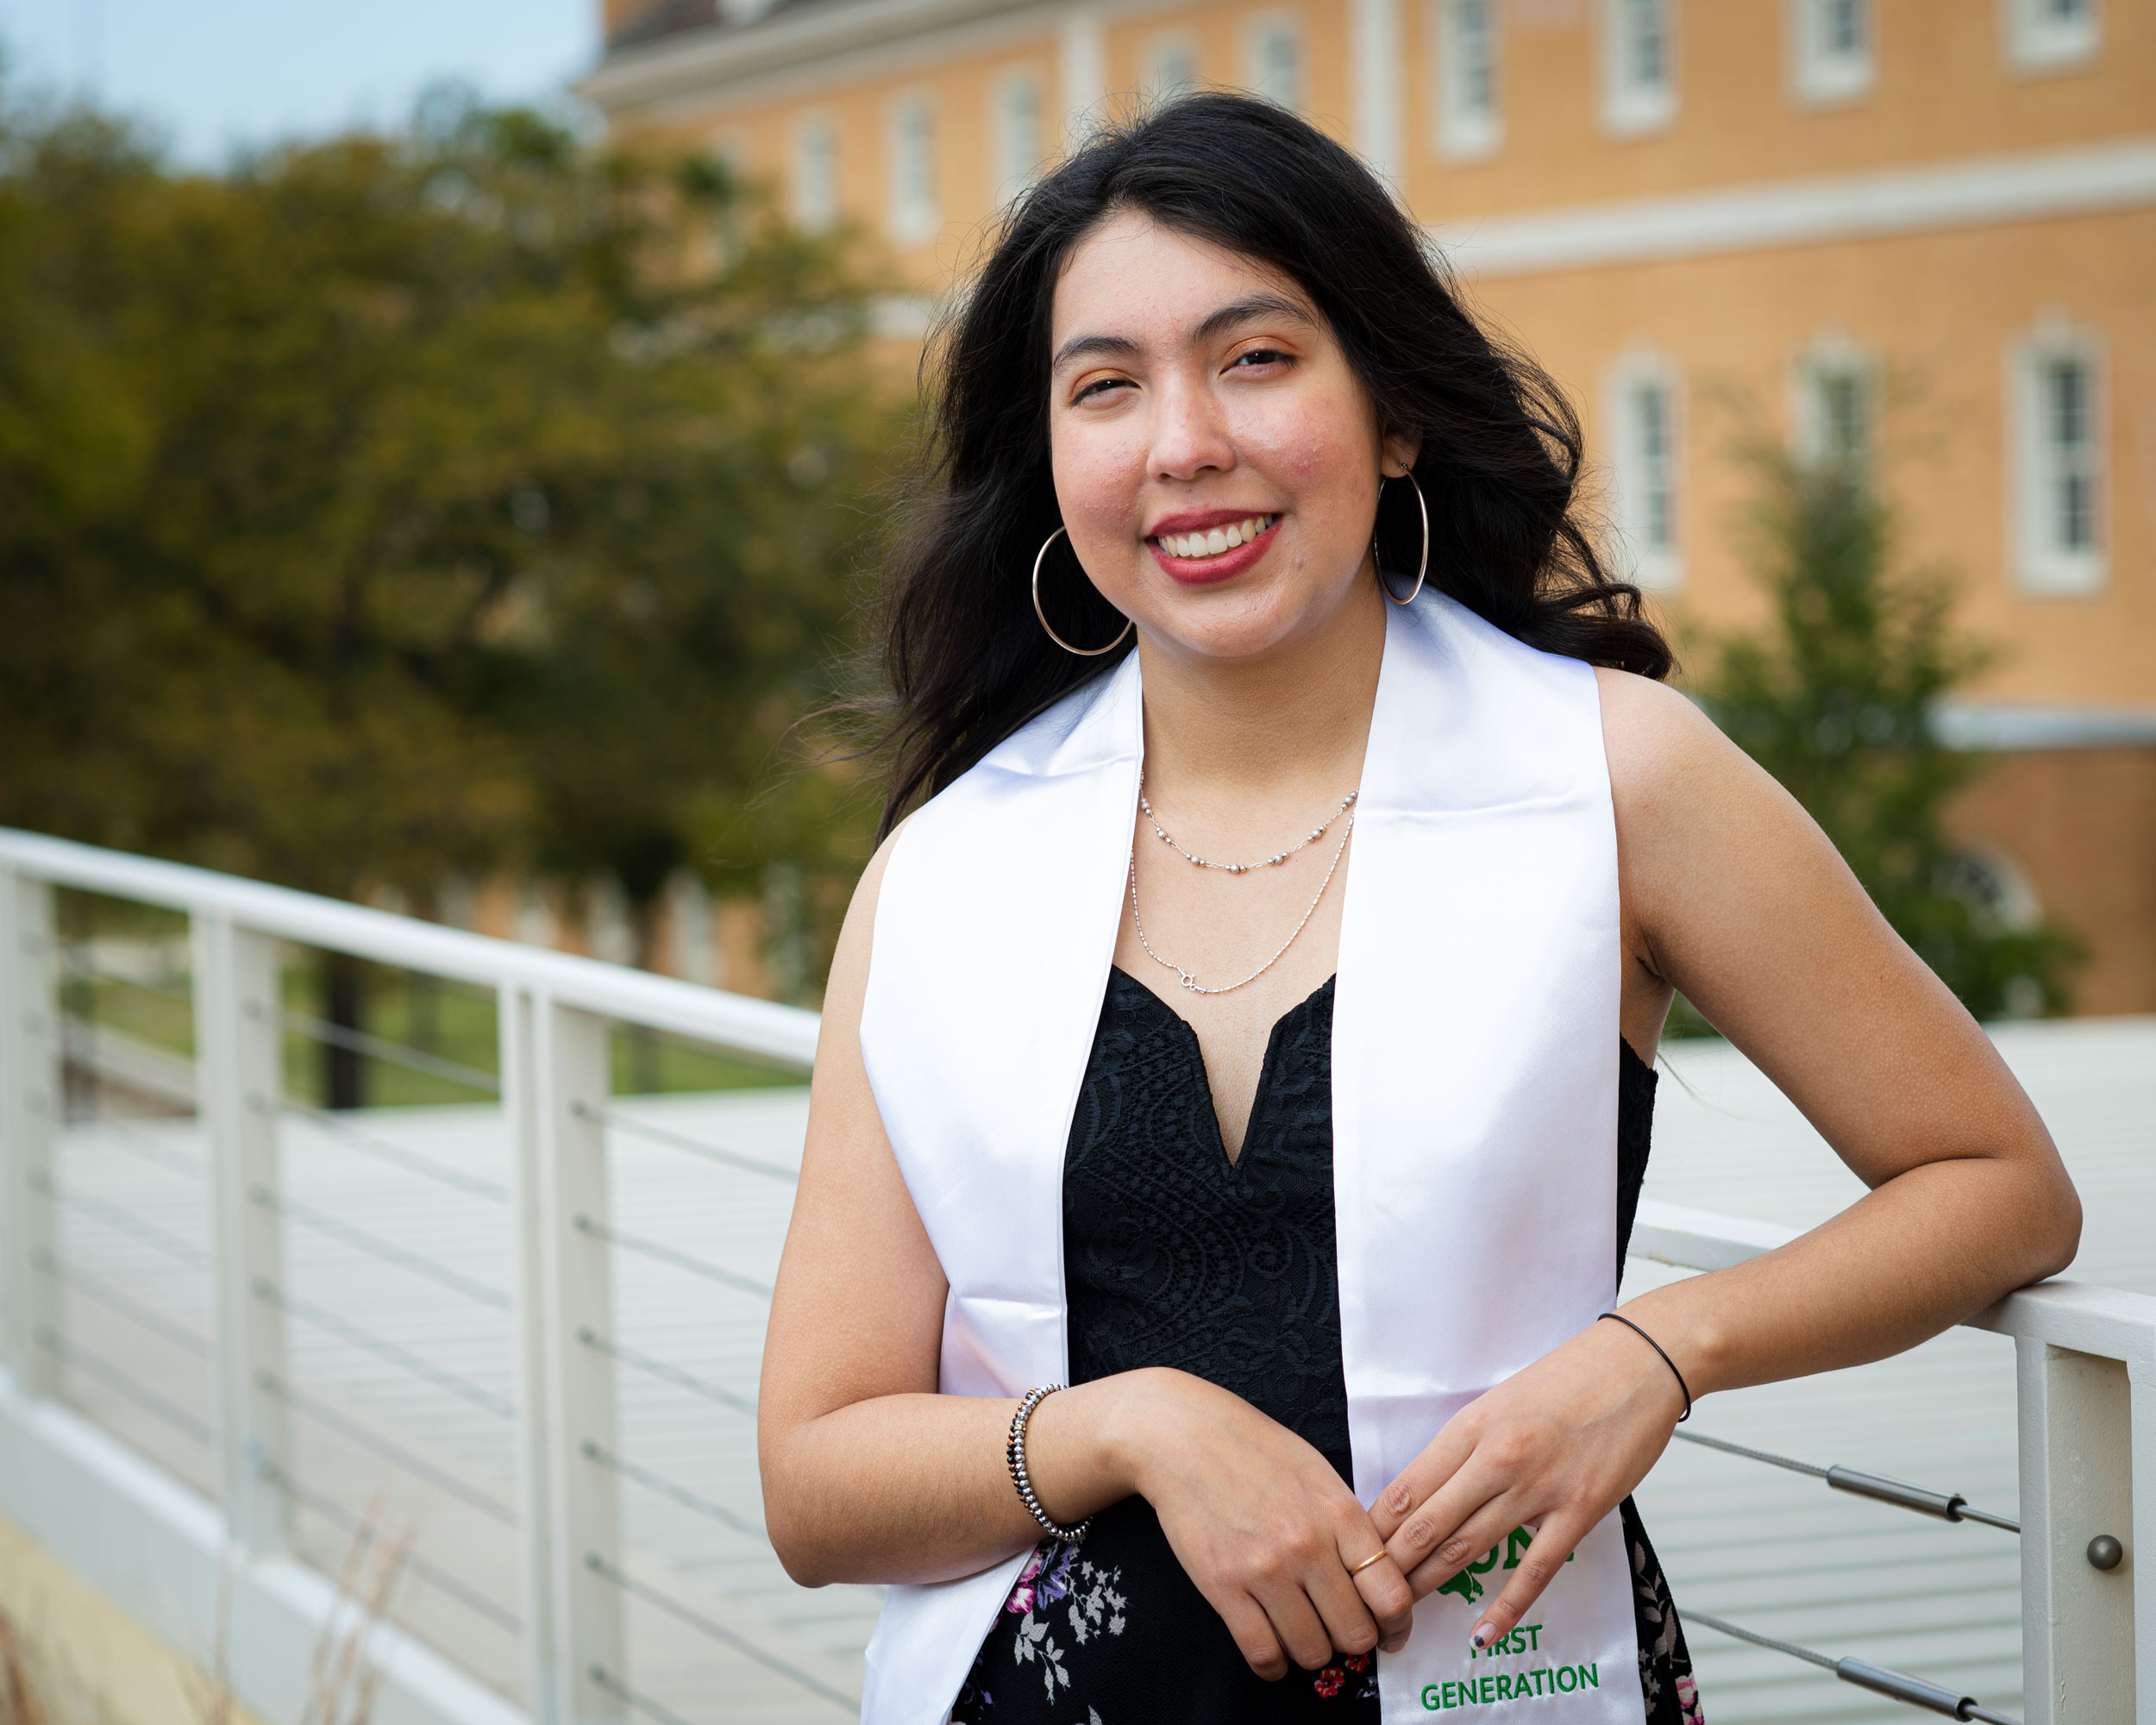 Alondra Lopez poses in front of McConnell Tower as part of a photo session for first-generation graduates at UNT.